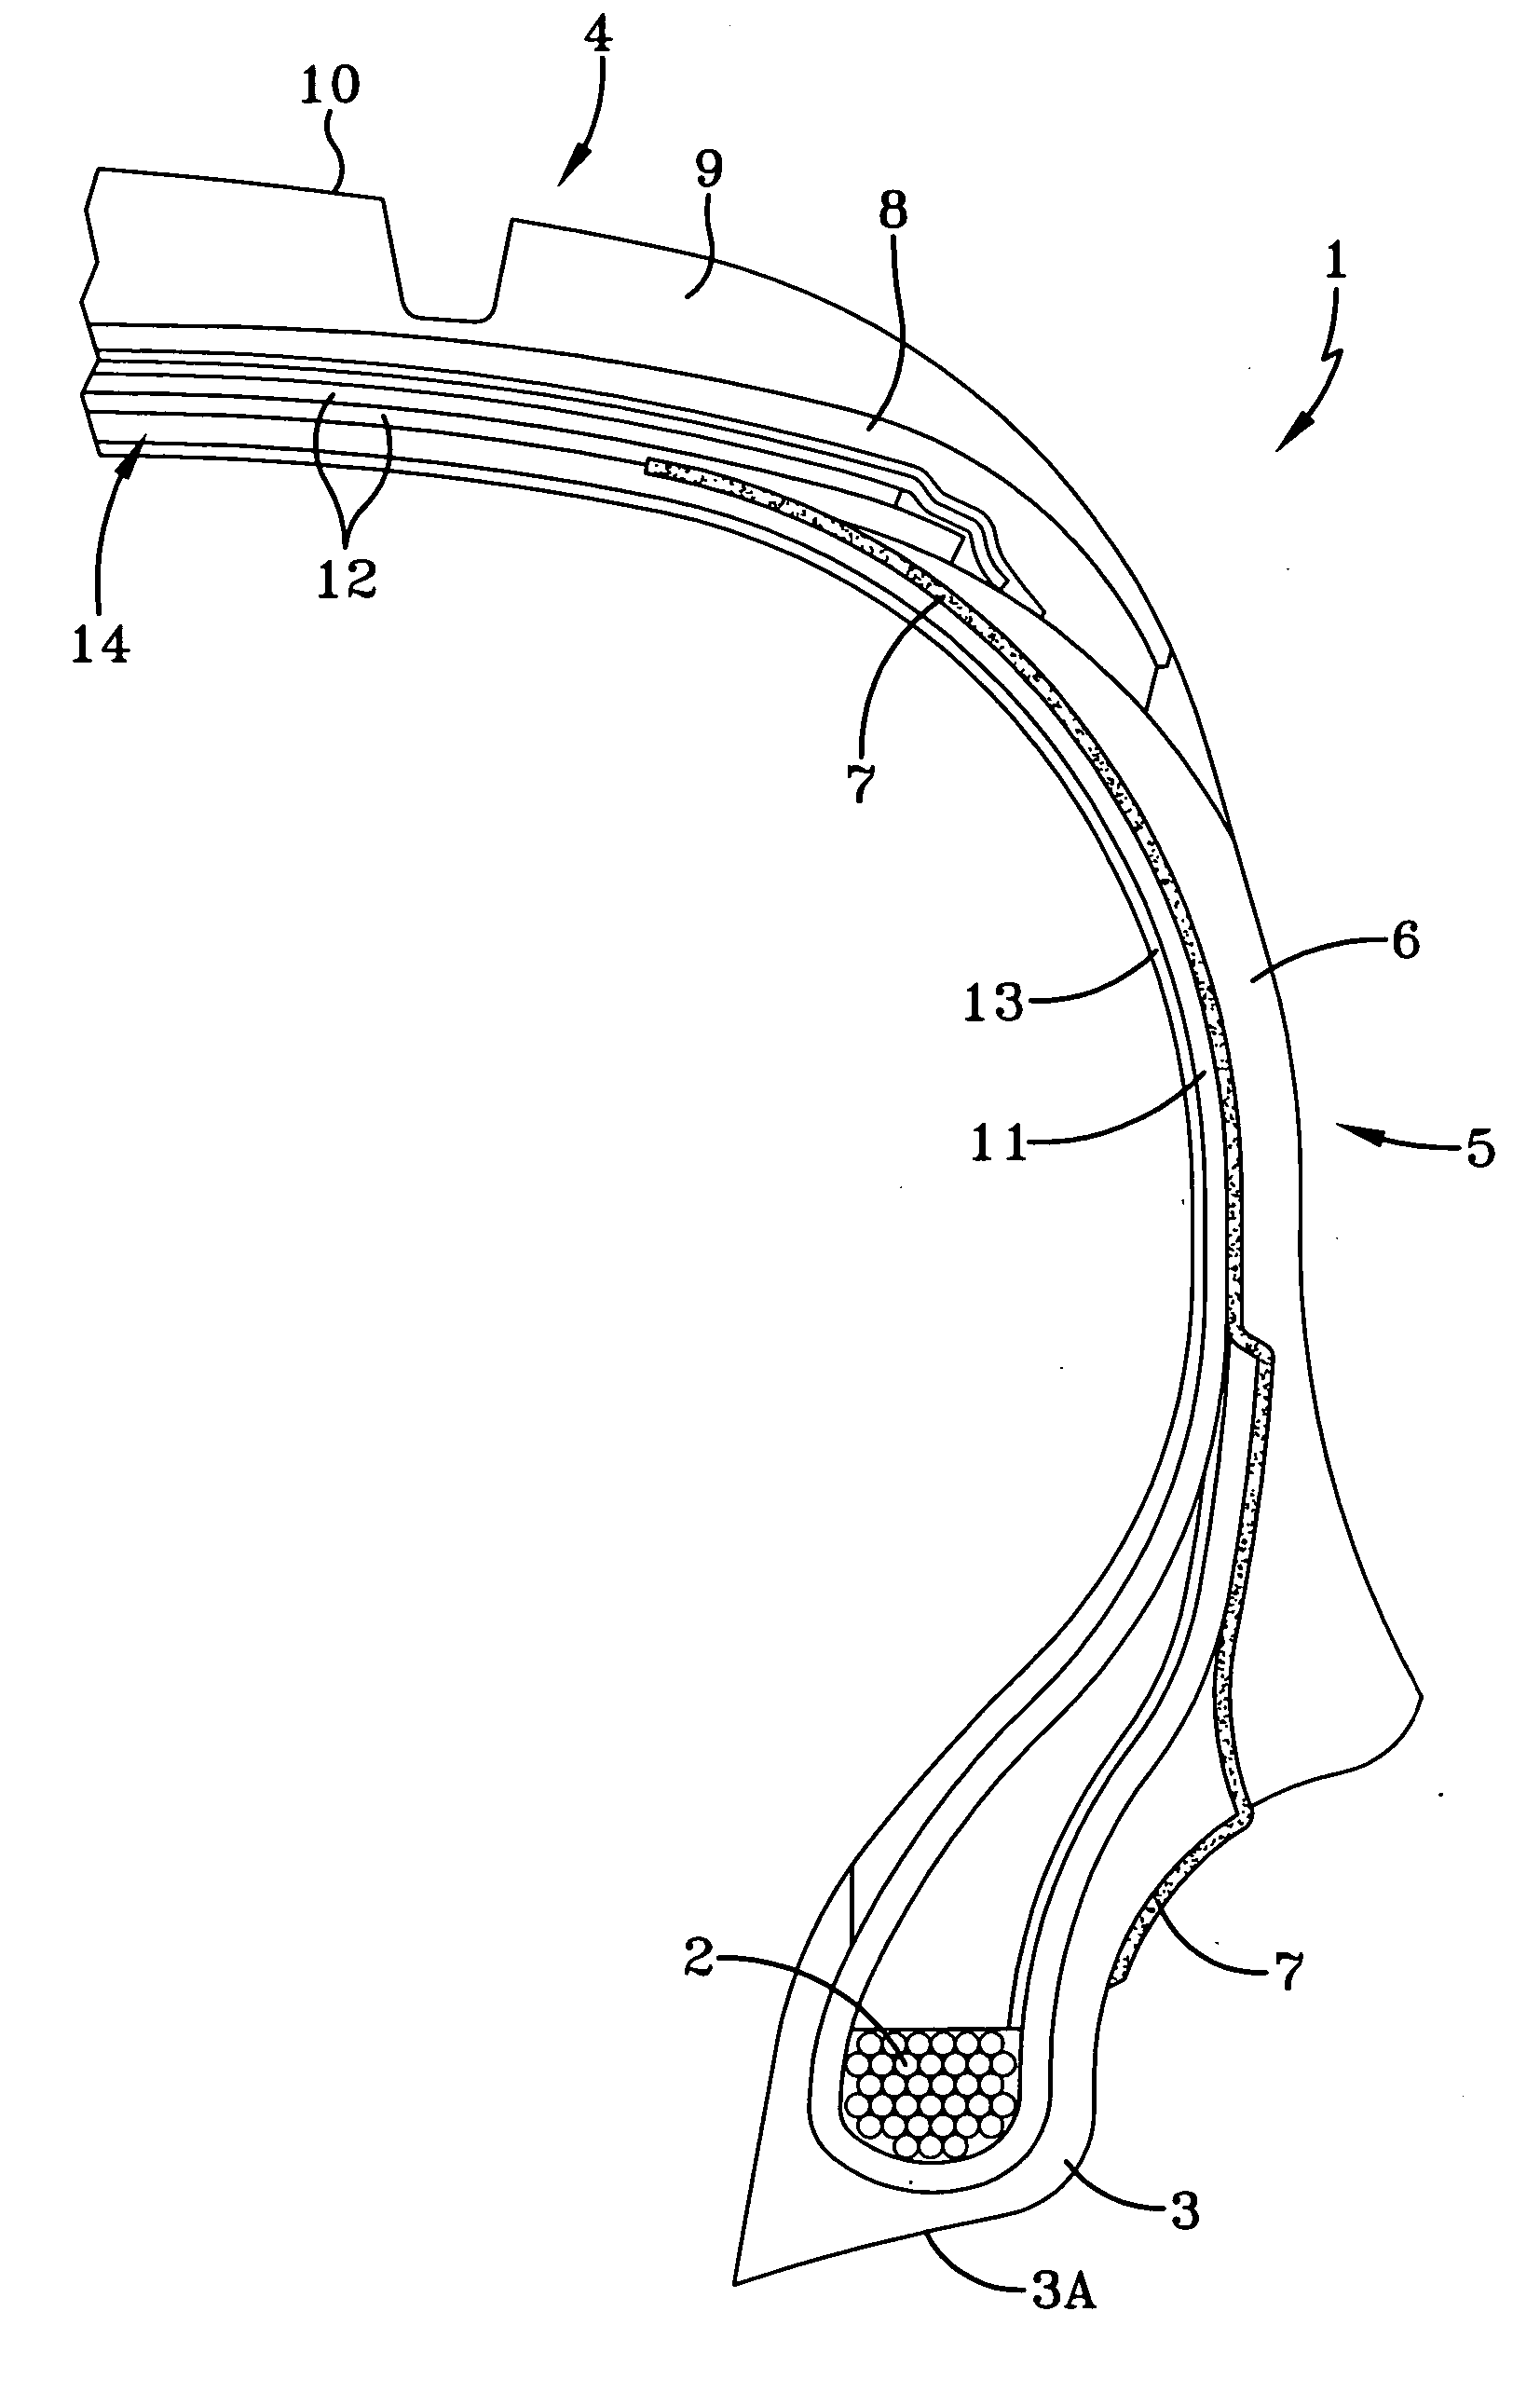 Pneumatic tire with electrically conductive cord extending from its outer wheel-rim mounting surface to its internal tread portion